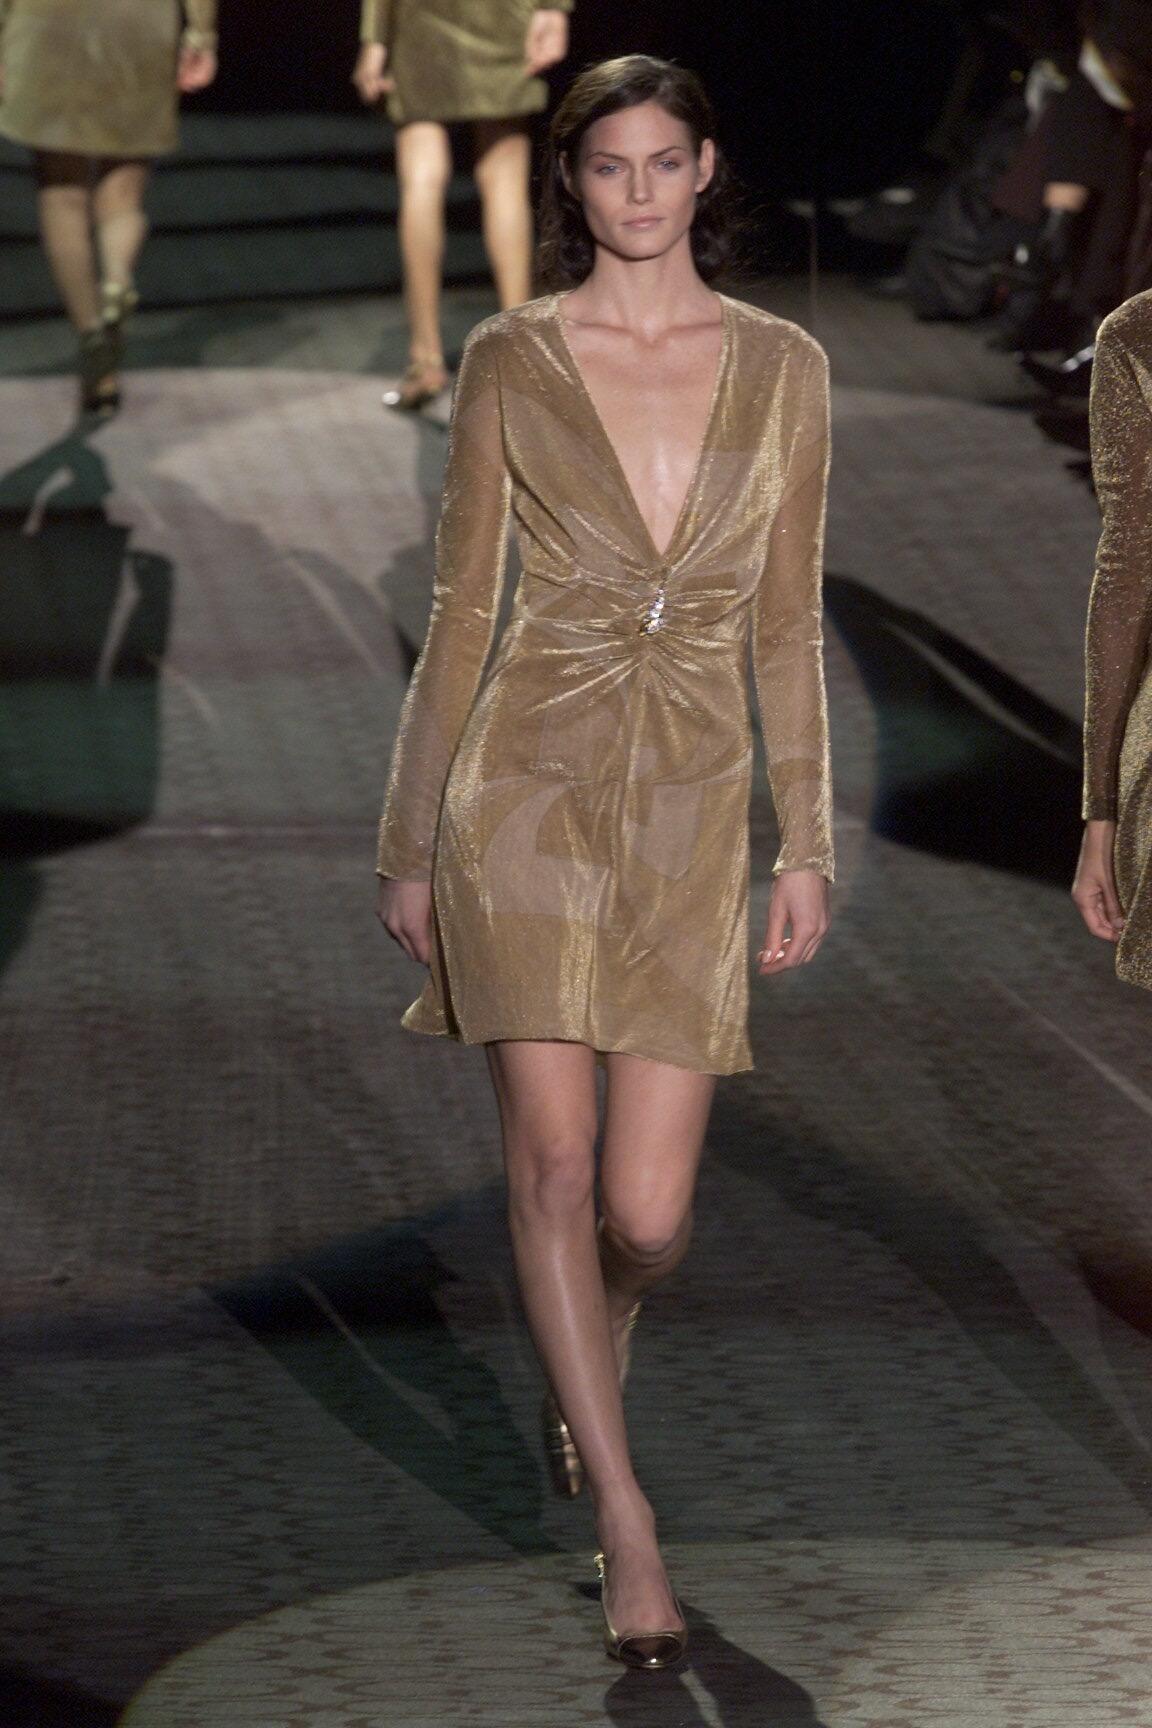 Presenting a shimmery disco-chic monochromatic gold Gucci mini dress, designed by Tom Ford. Debuted as look 28 on the F/W 2000 Gucci runway and modeled by Mini Arden, this dress literally sparkles. This shiny metallic dress is constructed with a